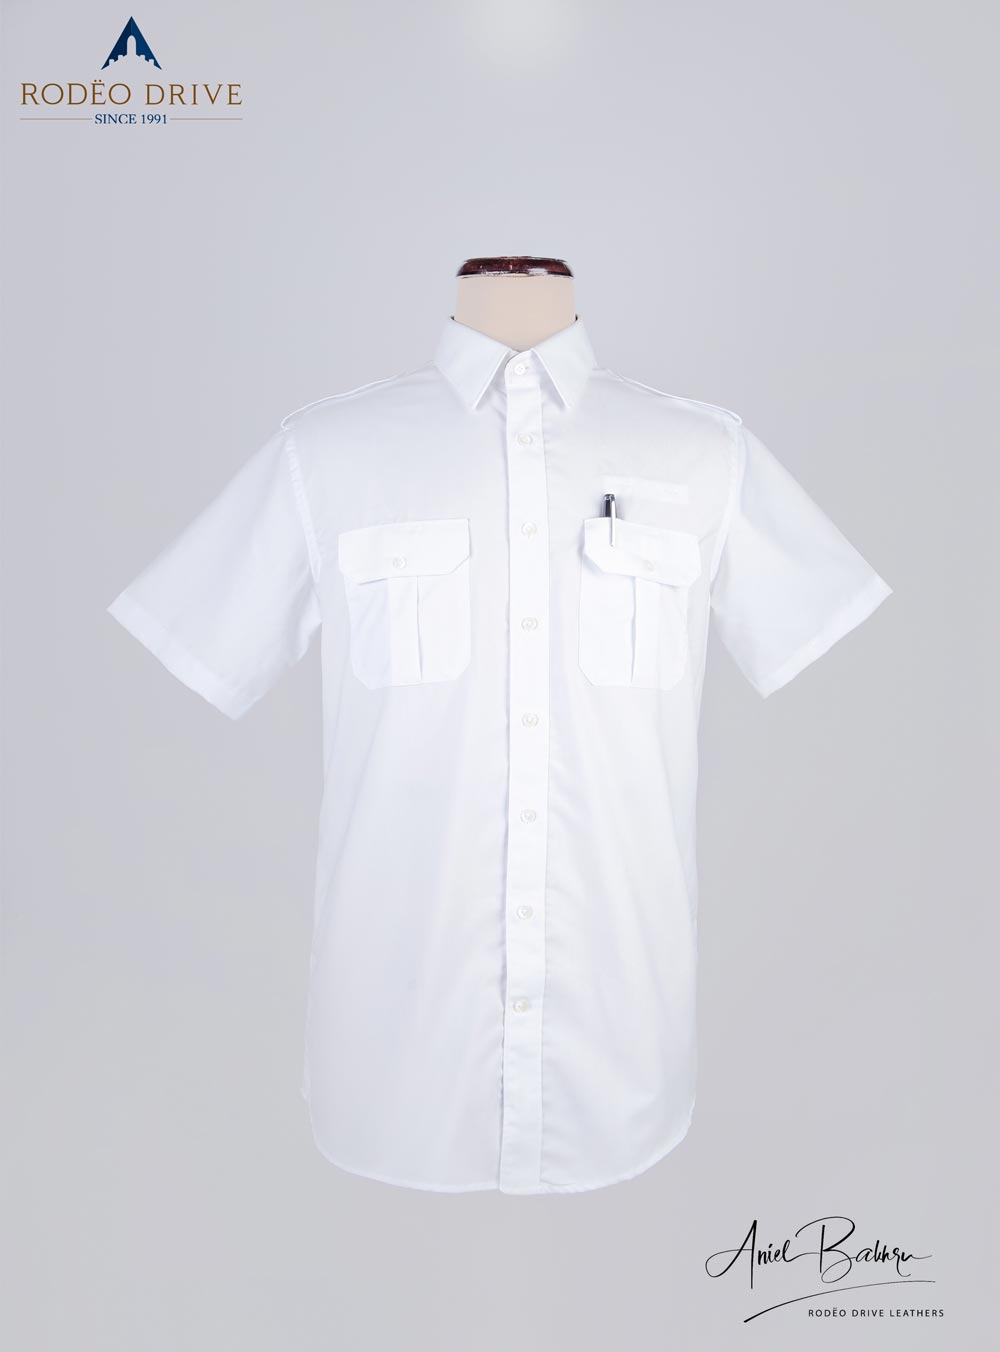 White Standard Pilot Shirt displayed on mannequin. It is buttoned. Two front pockets with Close strap visible. a pen is inserted in left pocket